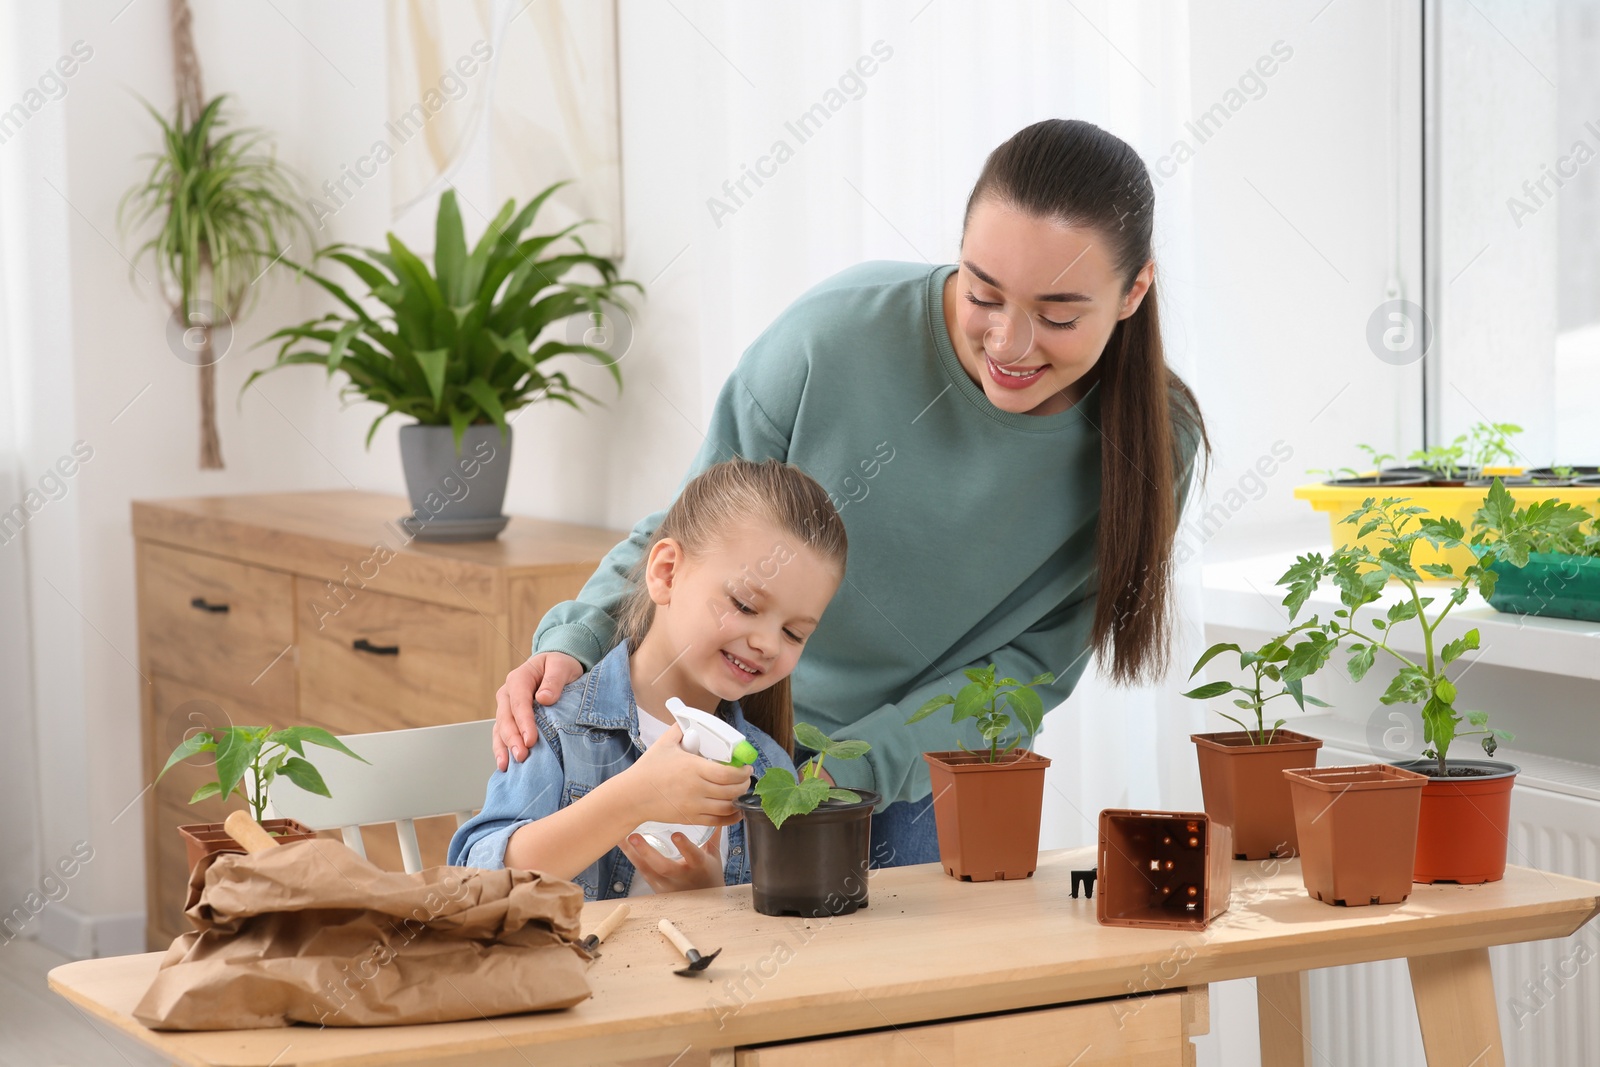 Photo of Mother and daughter spraying seedling in pot together at wooden table in room